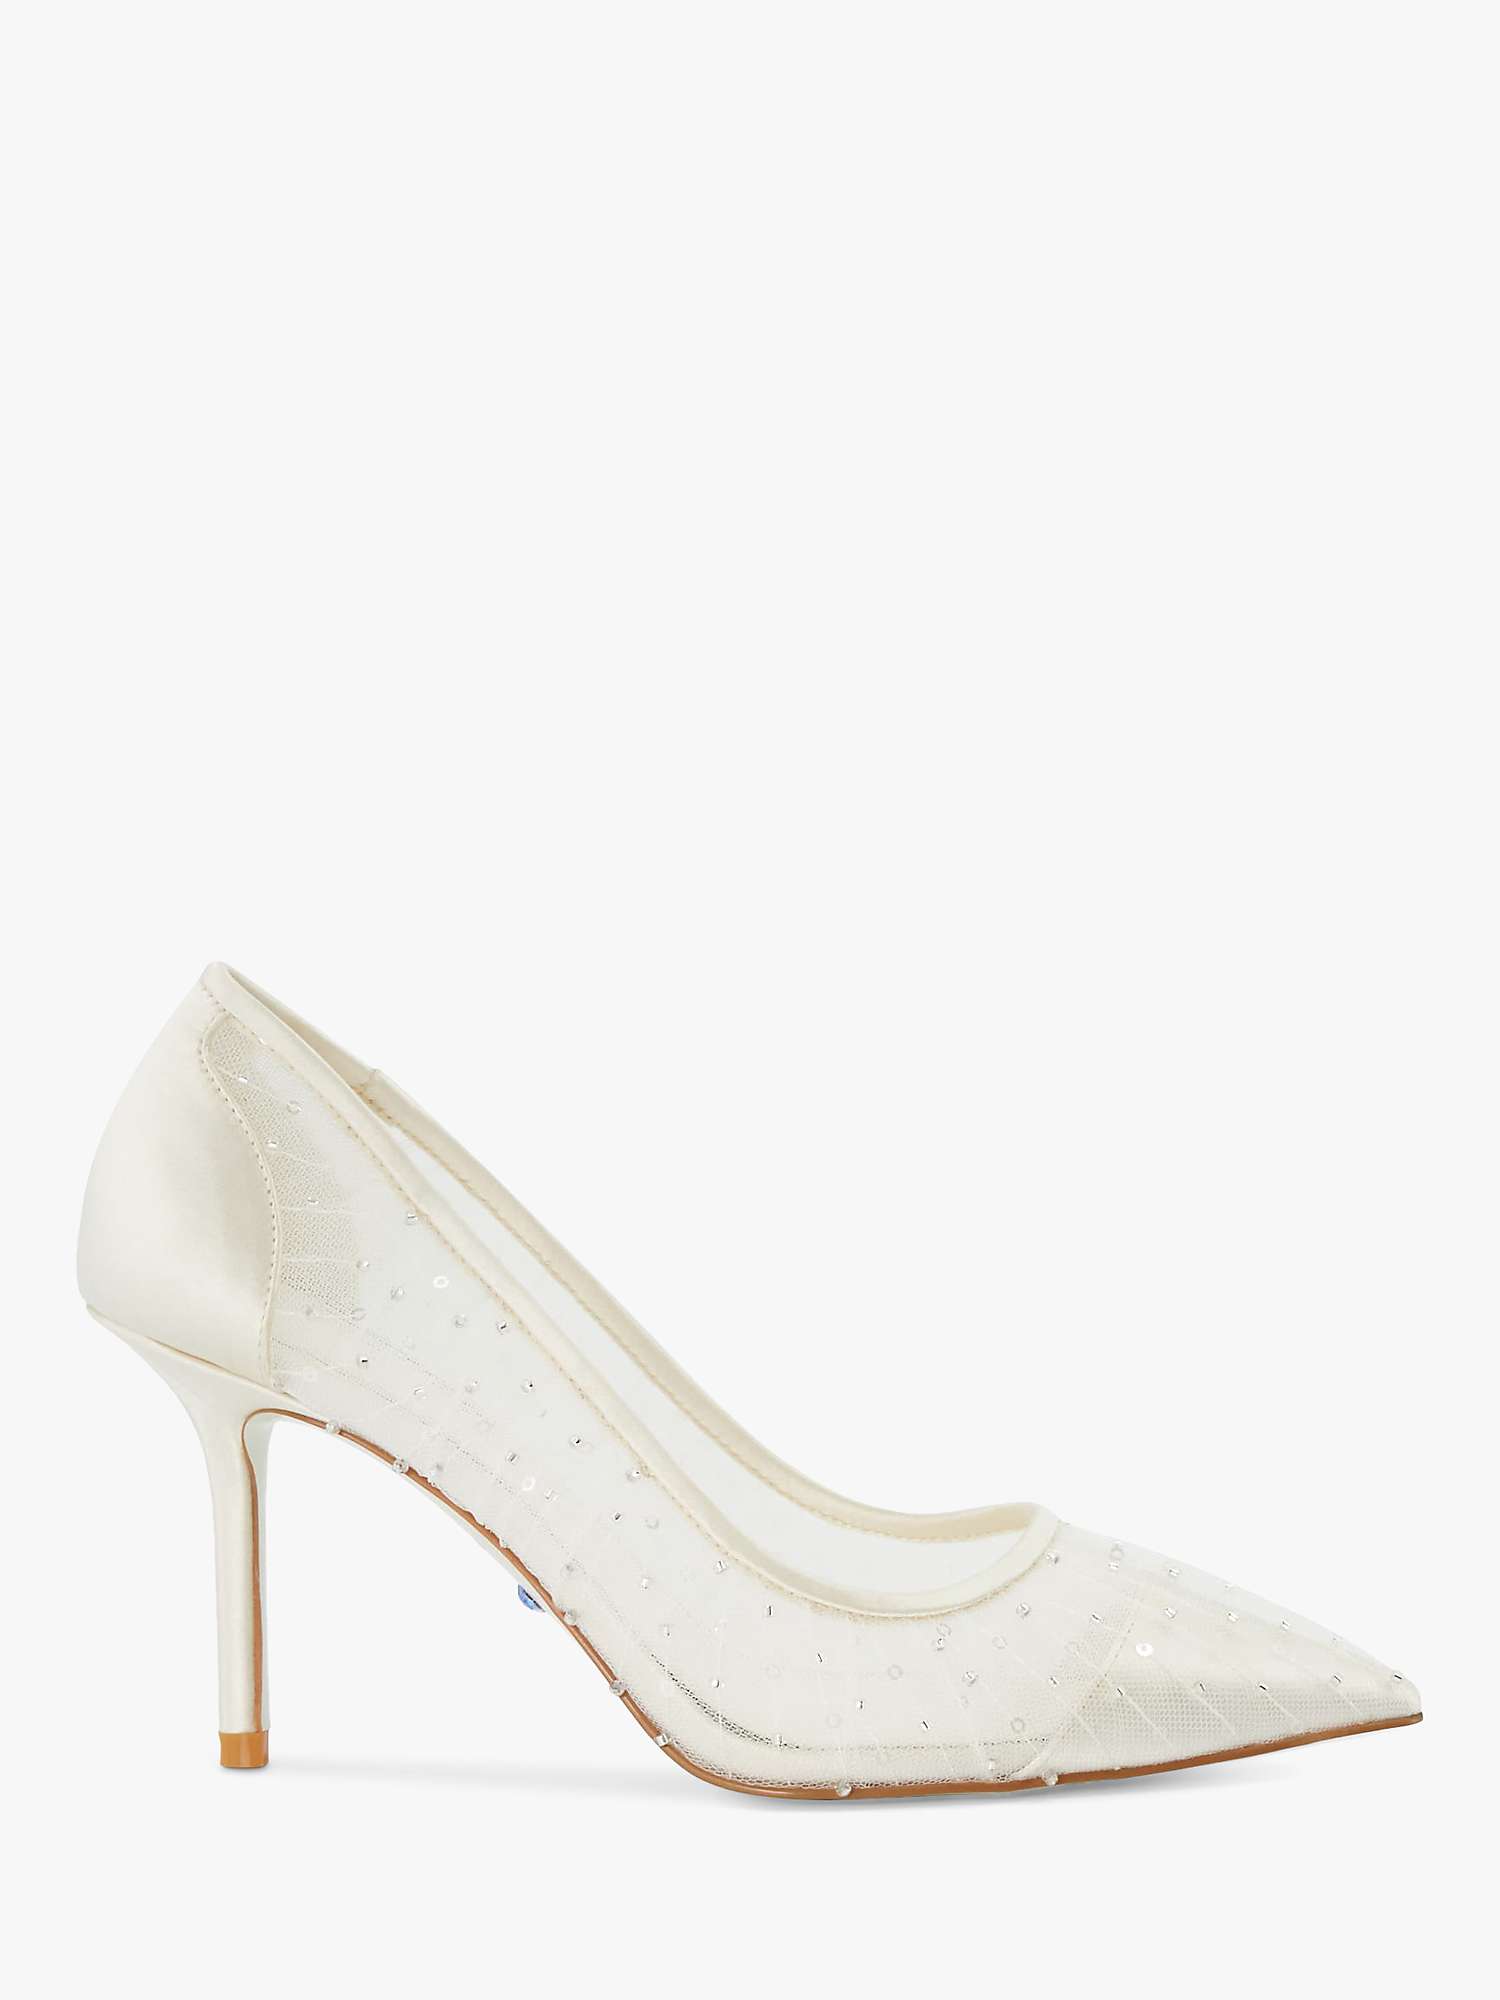 Buy Dune Bridal Collection Bespoke Embellished Pleated Mesh High Heel Court Shoes, Ivory Online at johnlewis.com